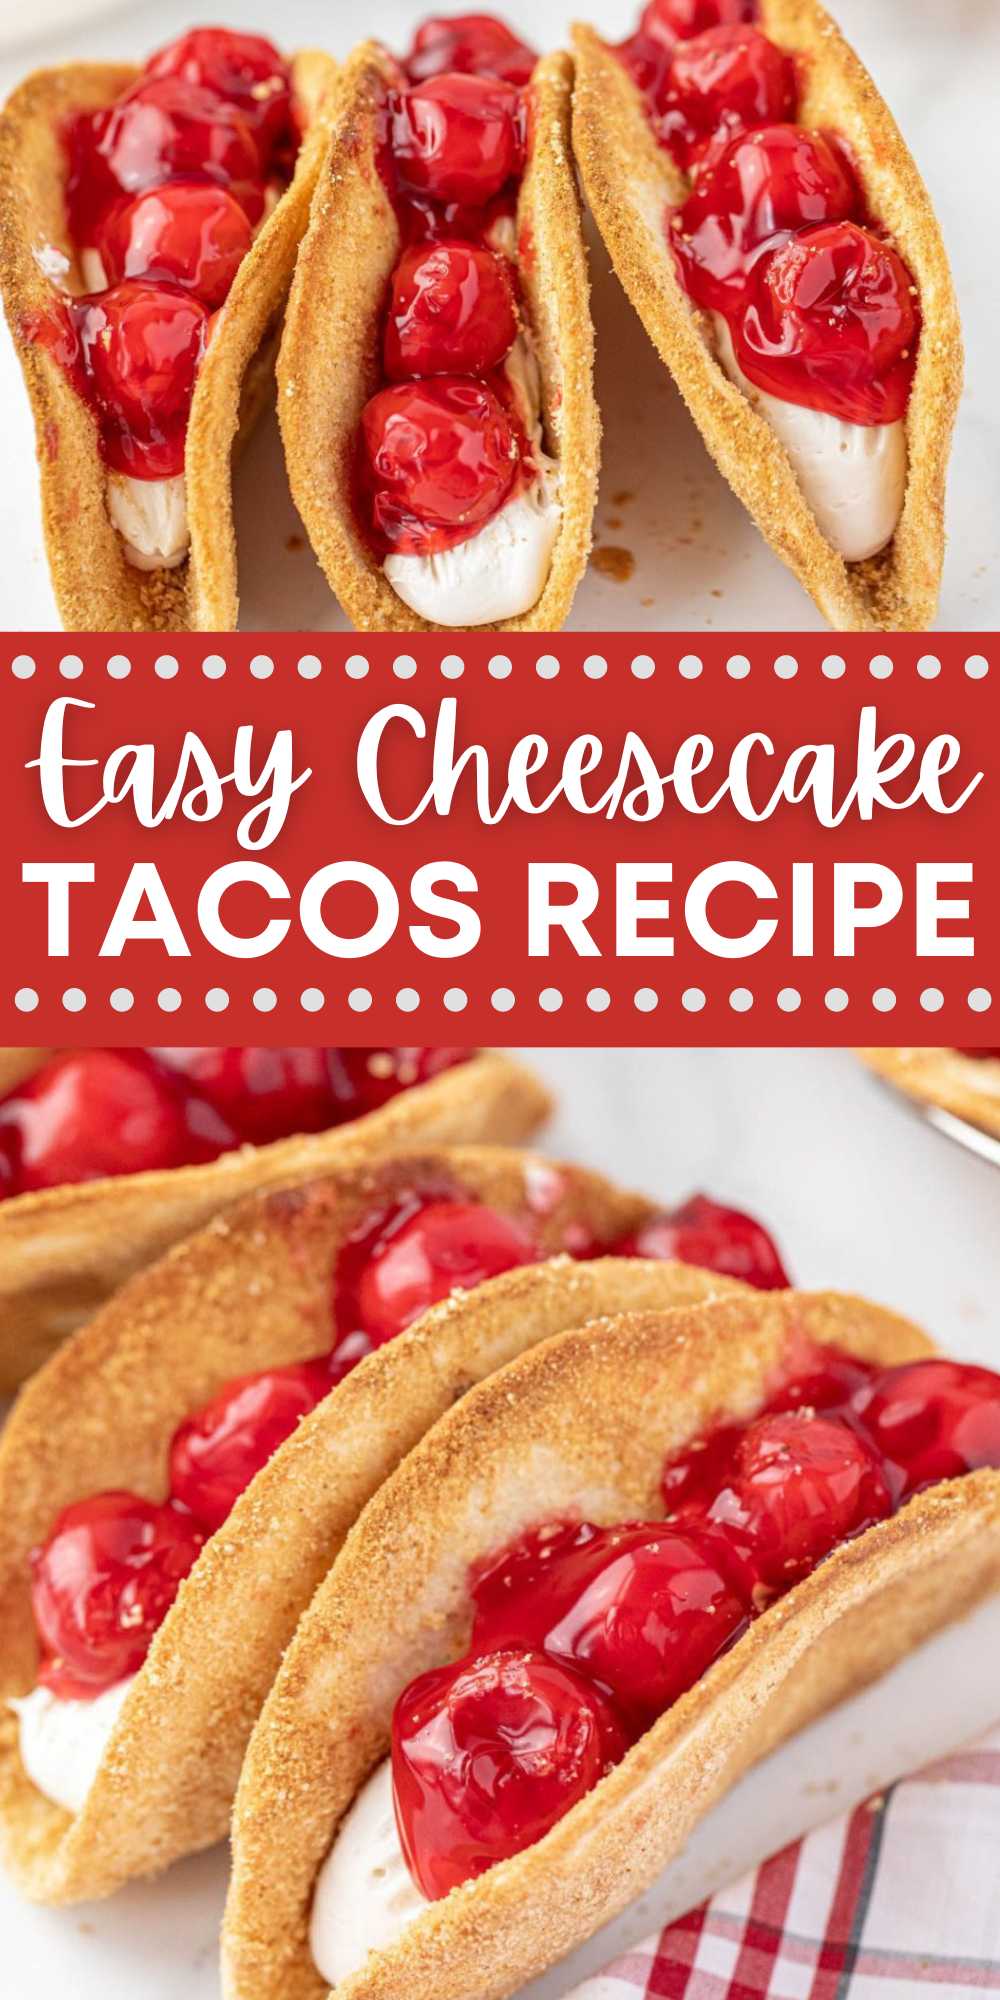 Cheesecake Tacos is loaded with cheesecake and topped with a cherry pie filling. They are crunchy and easy to make with simple ingredients. These Cheesecake Tacos are a sweet option to your traditional taco recipe. Cream cheese mixture fills a graham cracker and sugar blend tortilla shell to create the ultimate dessert. #eatingonadime #cheesecaketacos #cherrycheesecaketacos